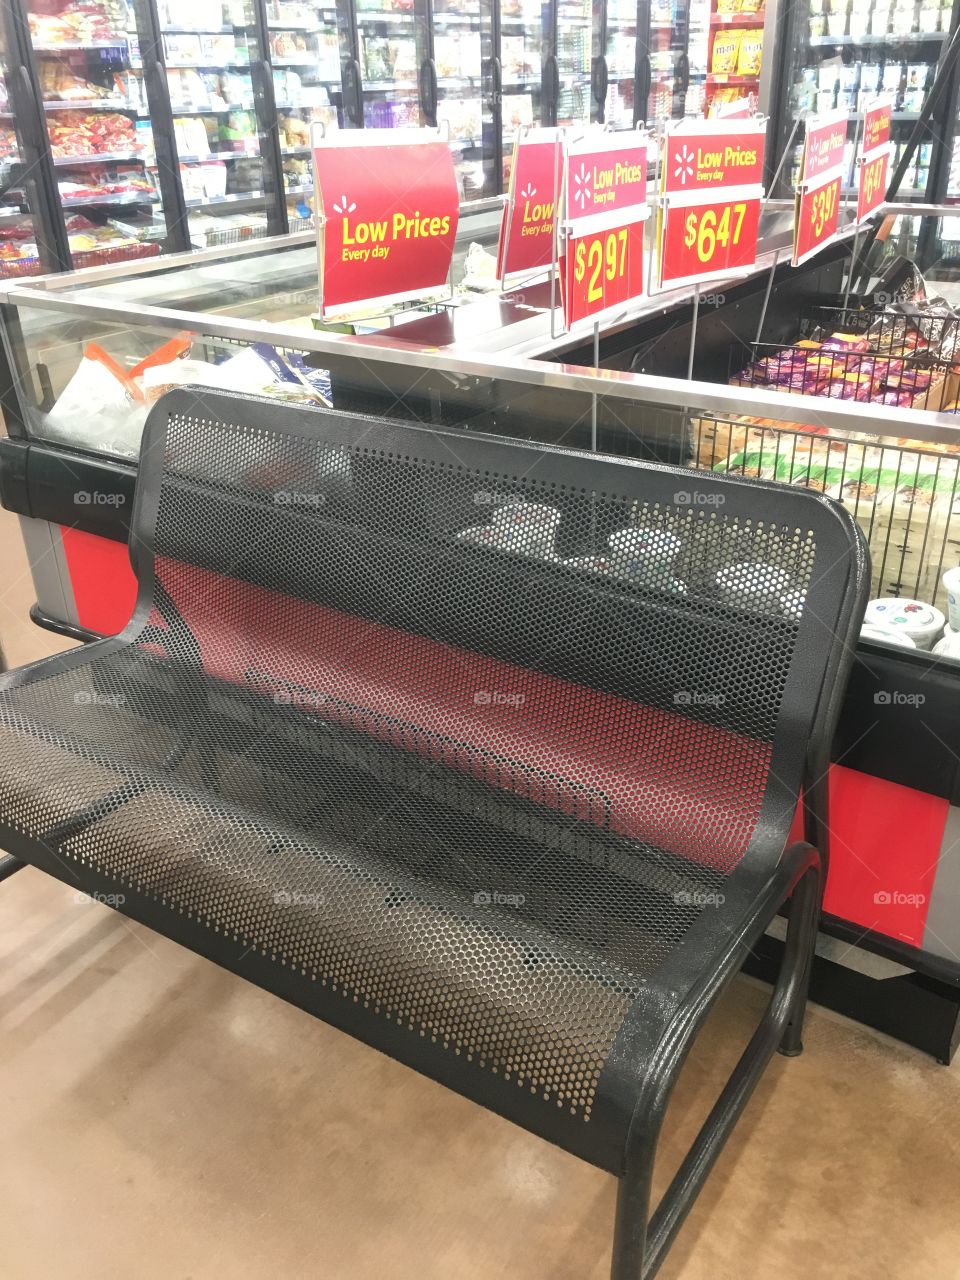 My husband calls this the hot flash bench. It is next to refrigerated cases in Walmart 